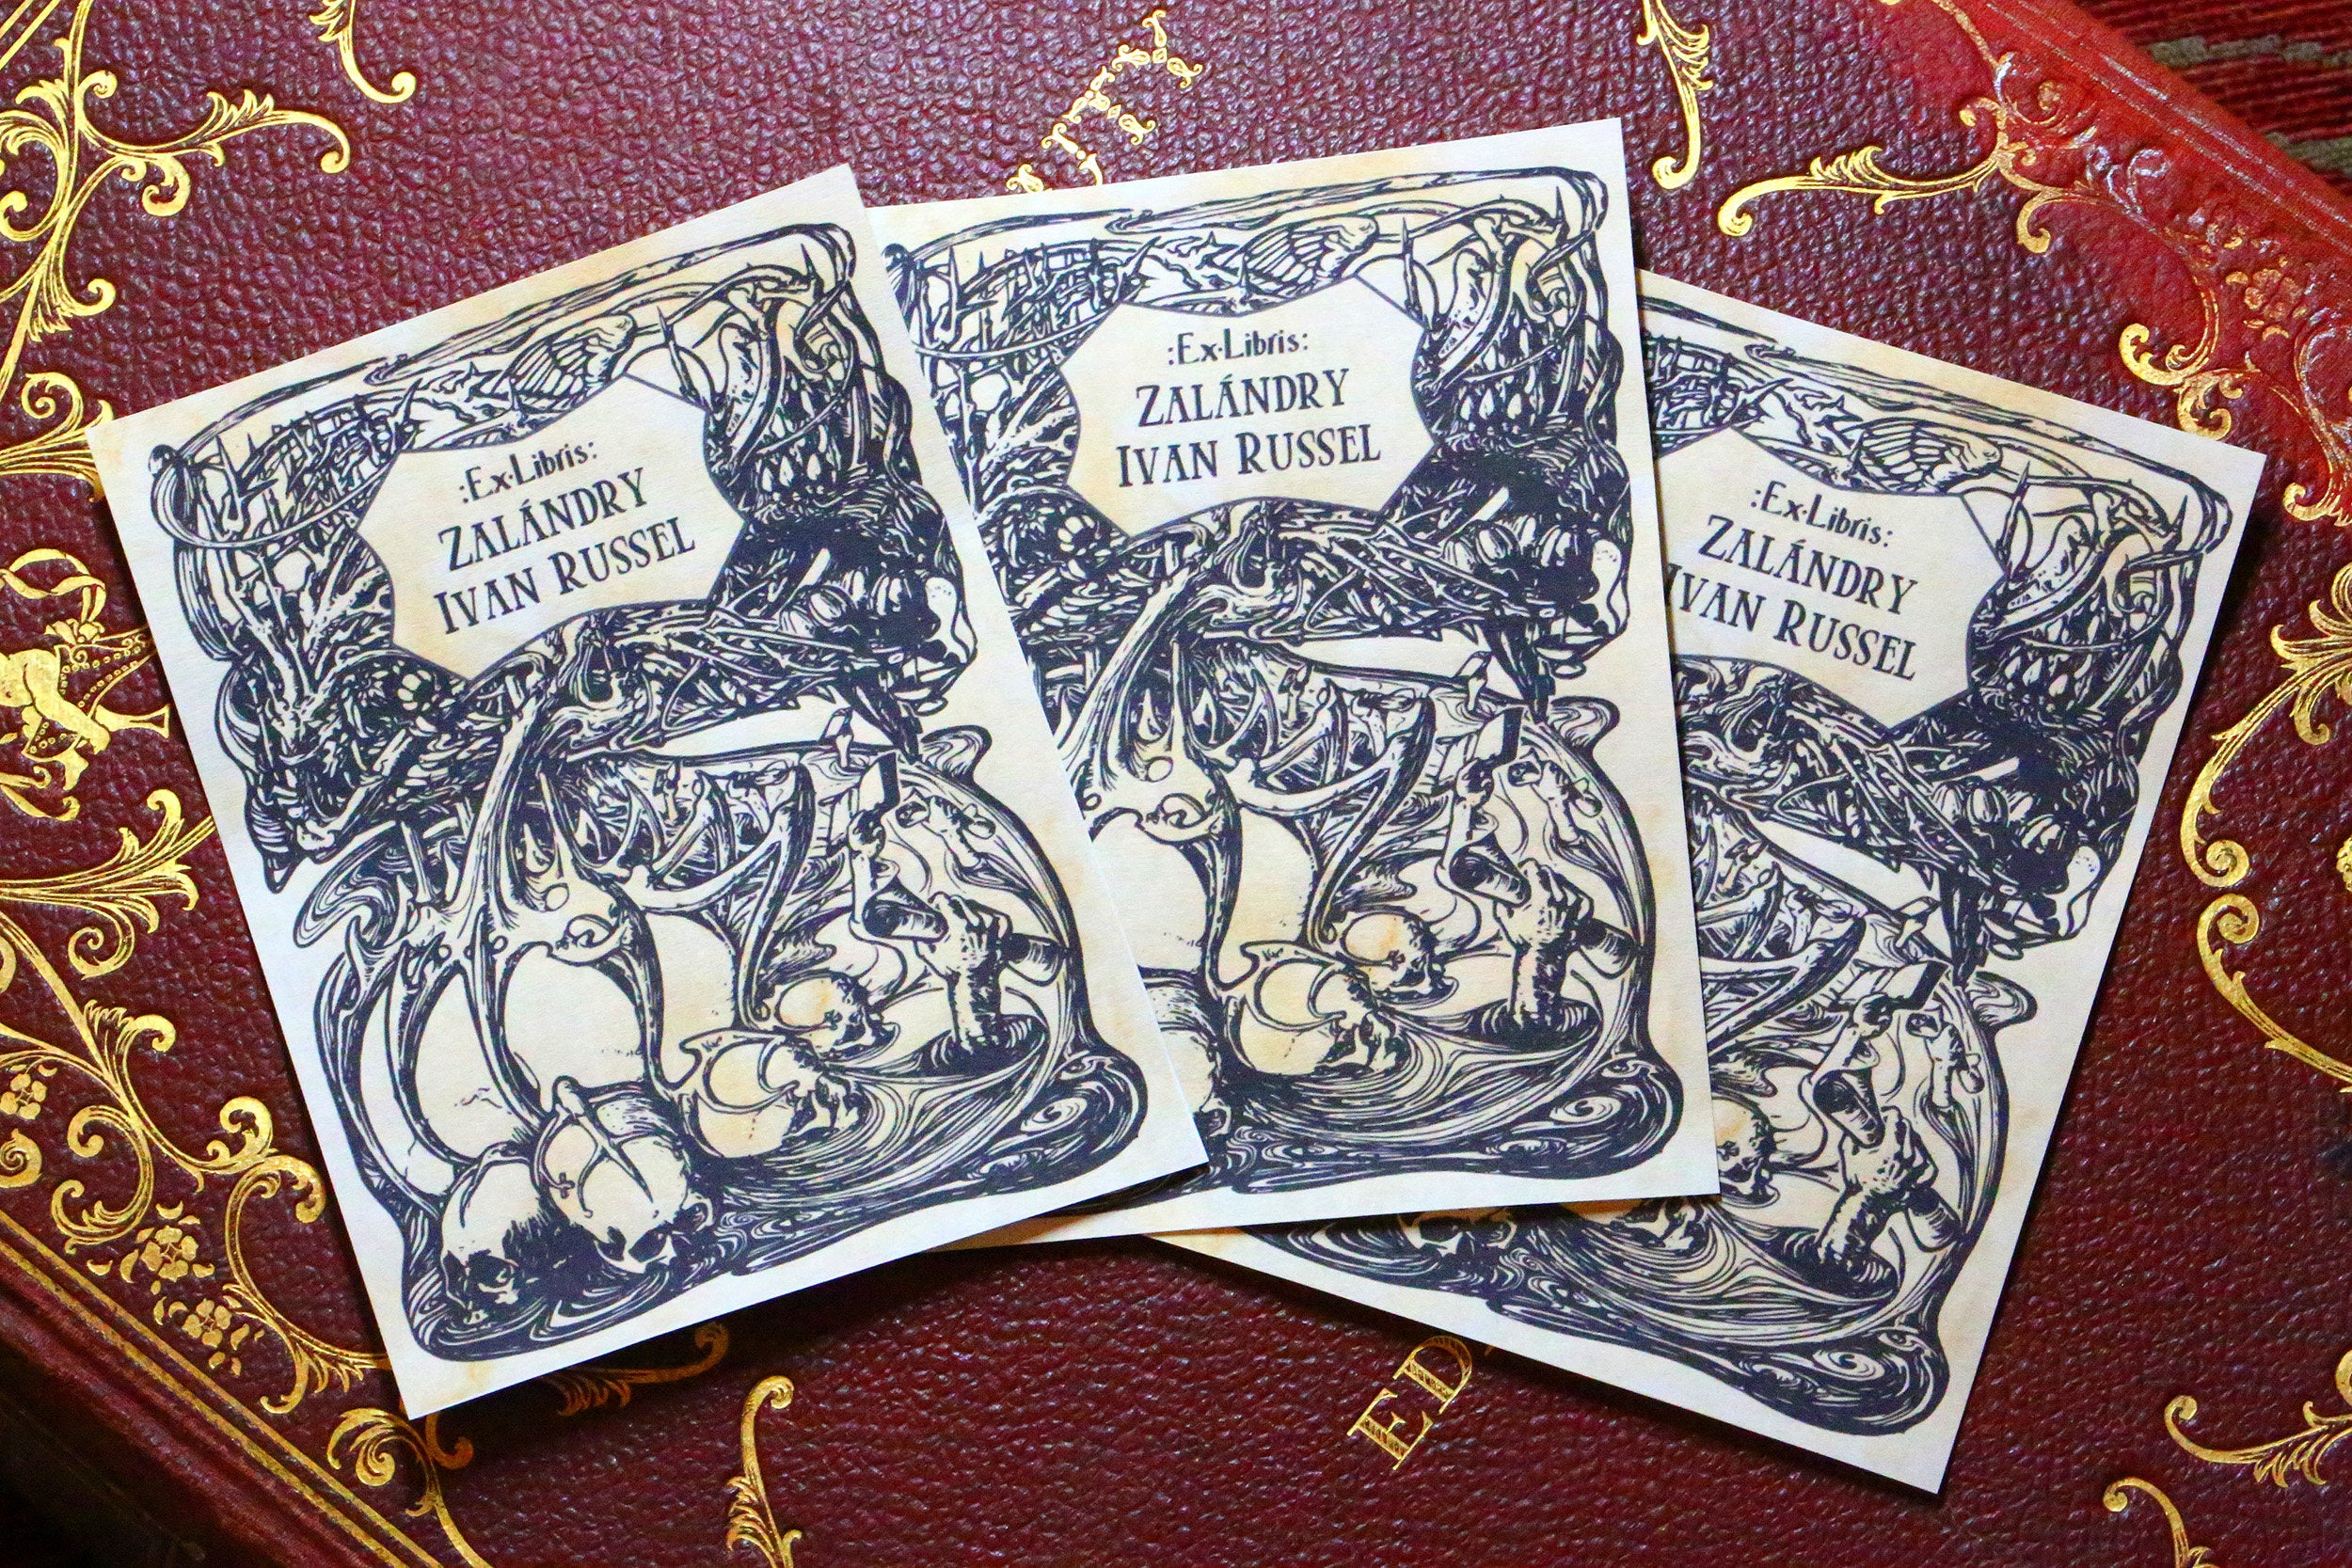 Bones and Scrolls, Personalized Gothic Ex-Libris Bookplates, Crafted on Traditional Gummed Paper, 3in x 4in, Set of 30